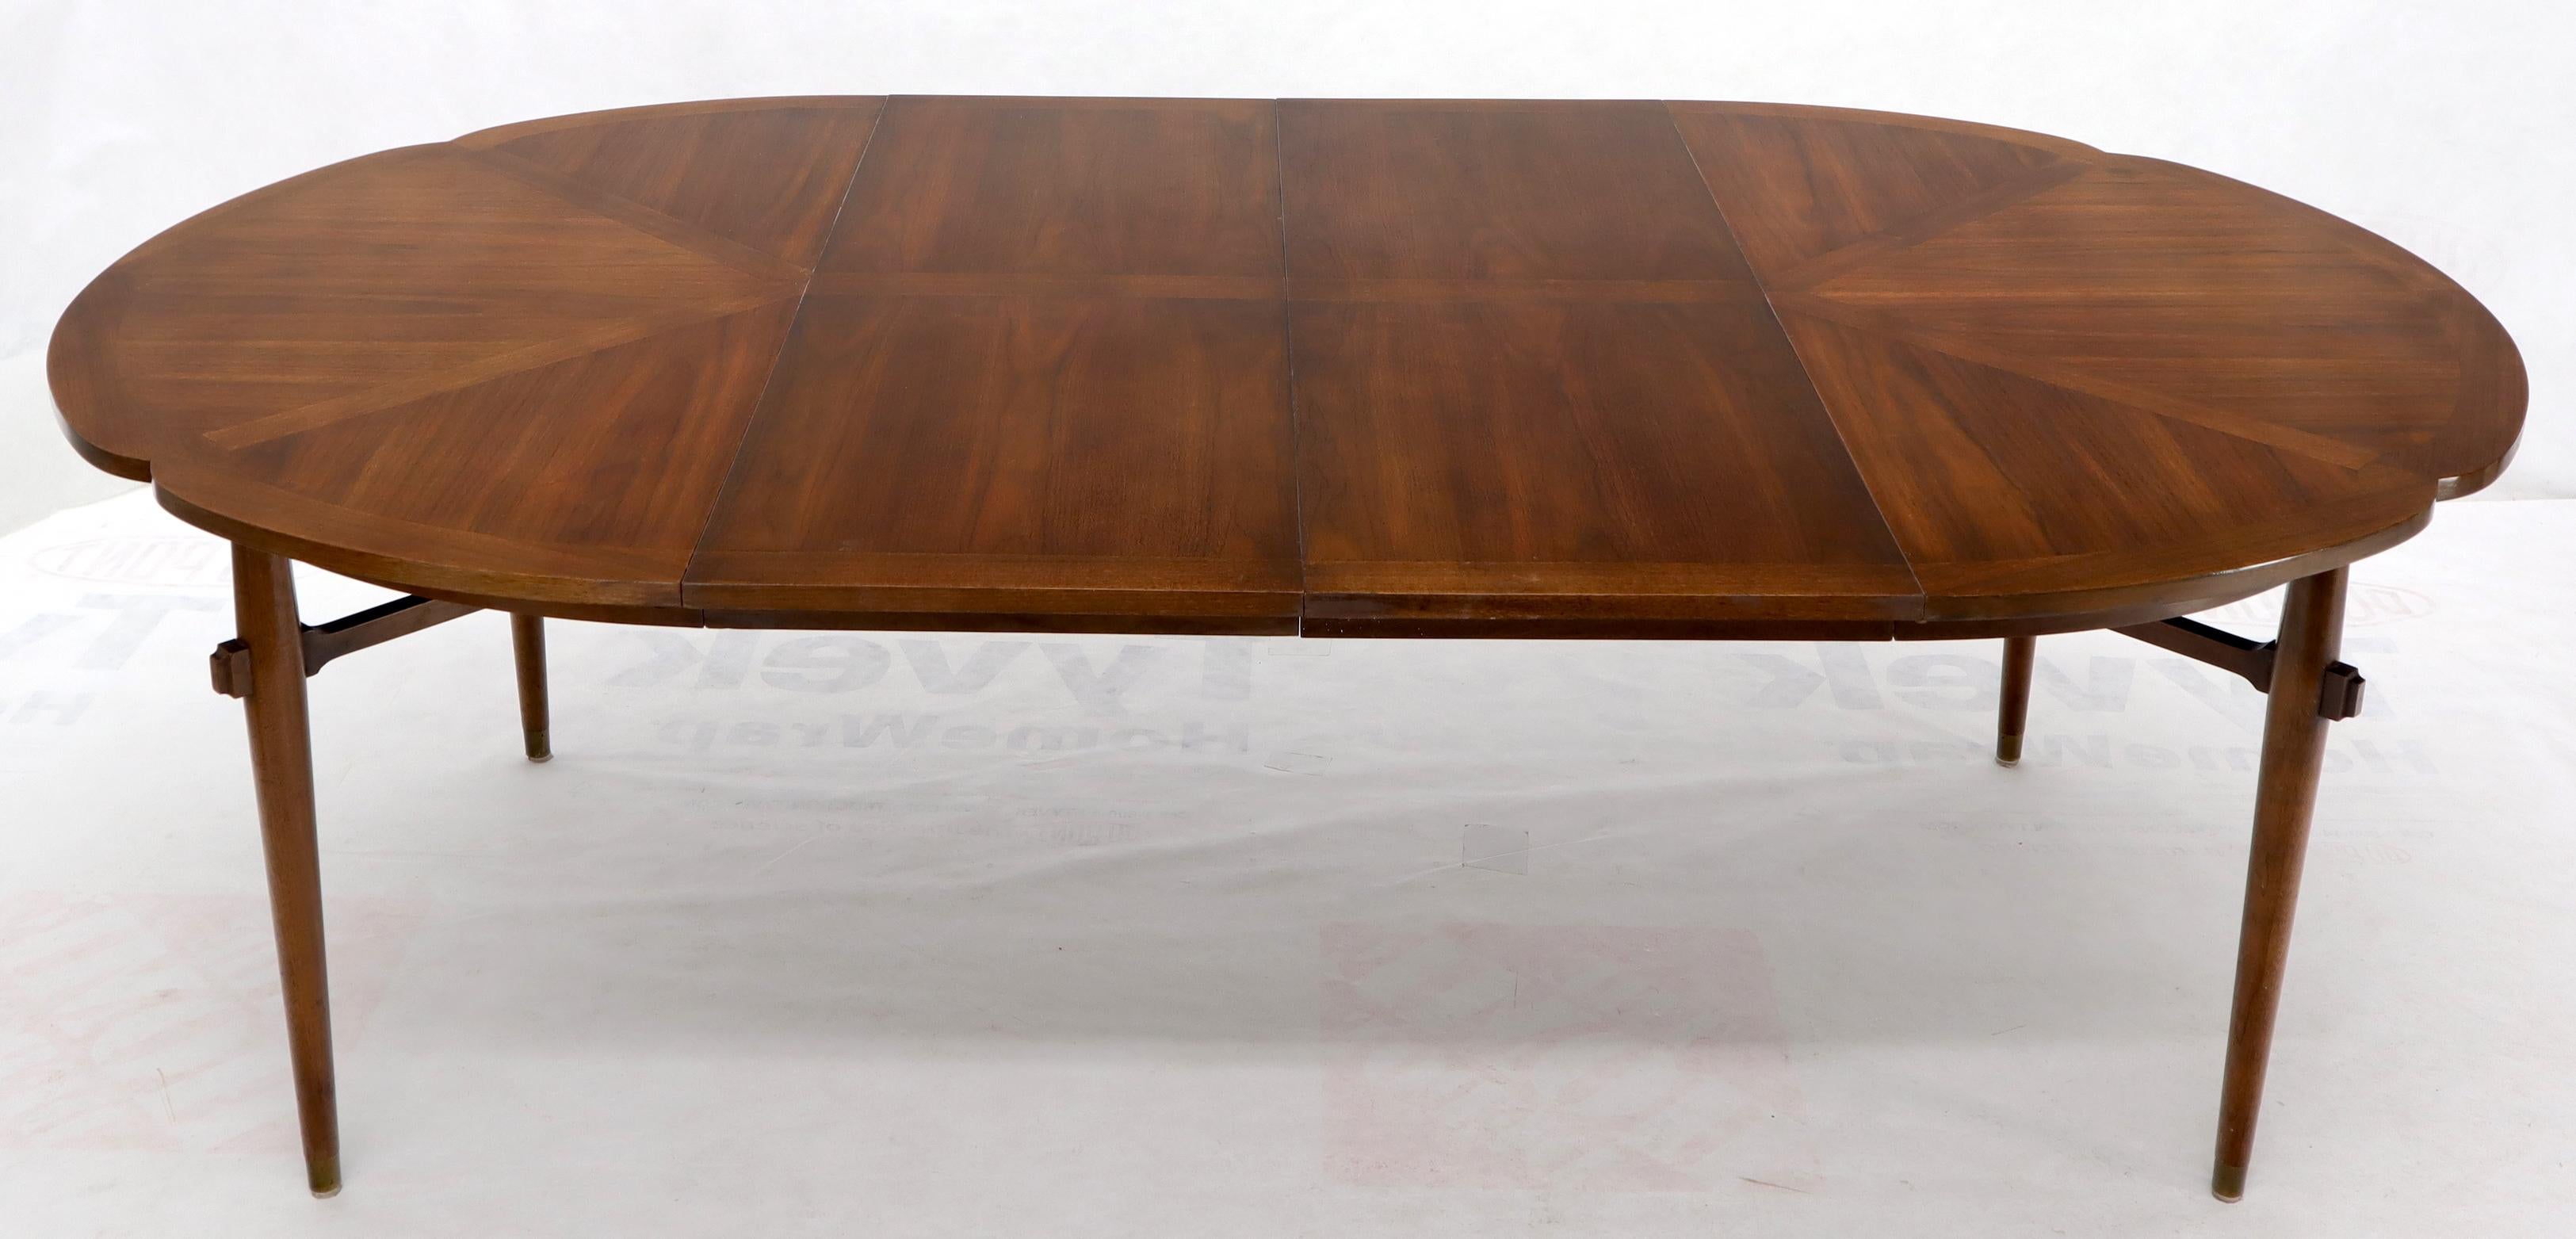 Walnut Daisy Shape Top Dining Table with Two Extension Boards Leaves 3